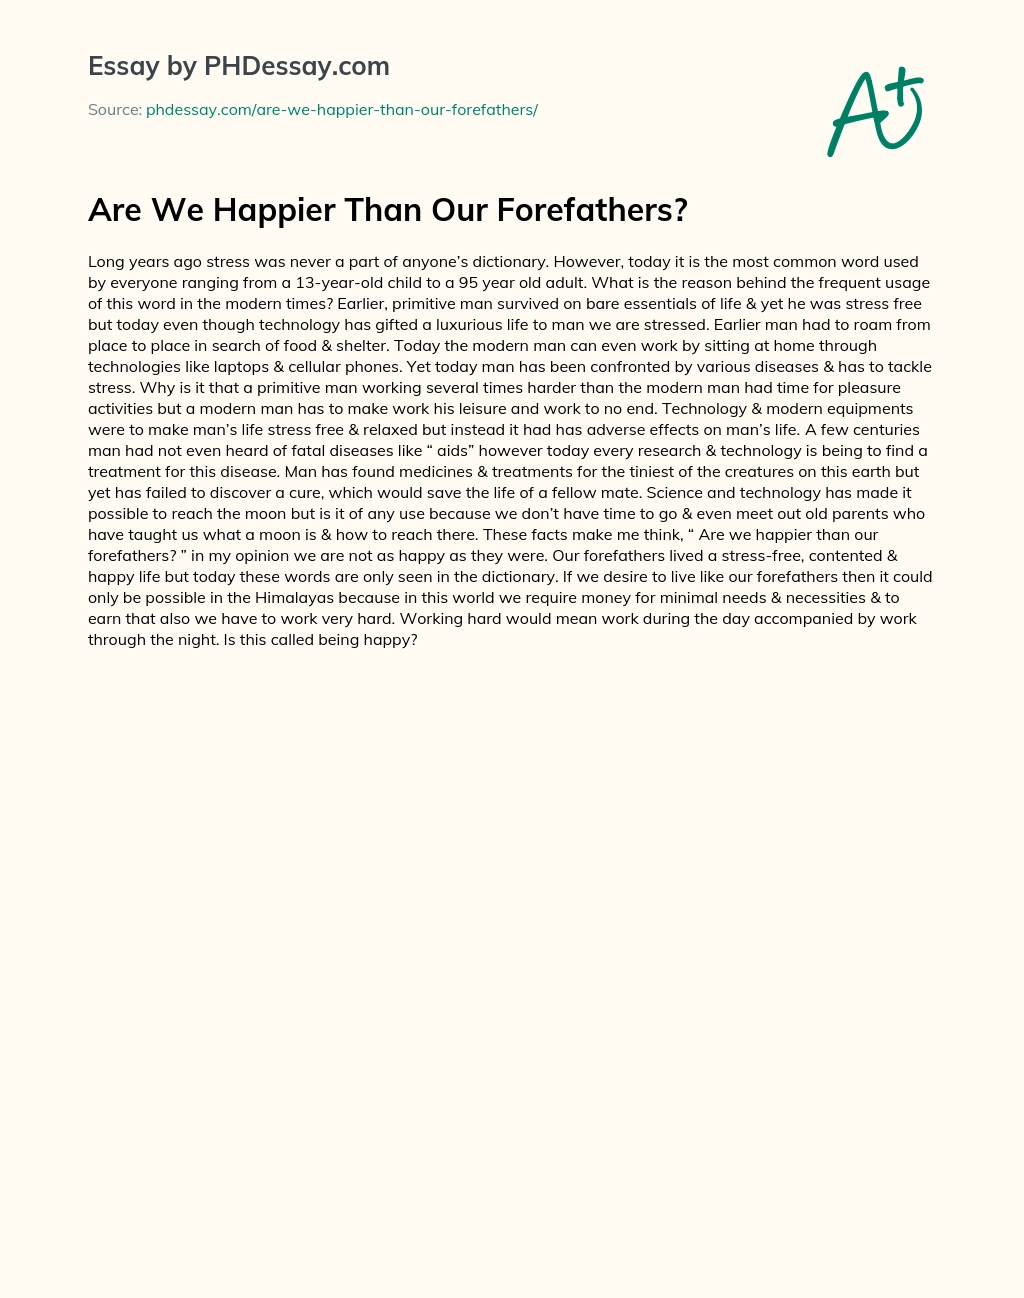 essay on we are better than our forefathers